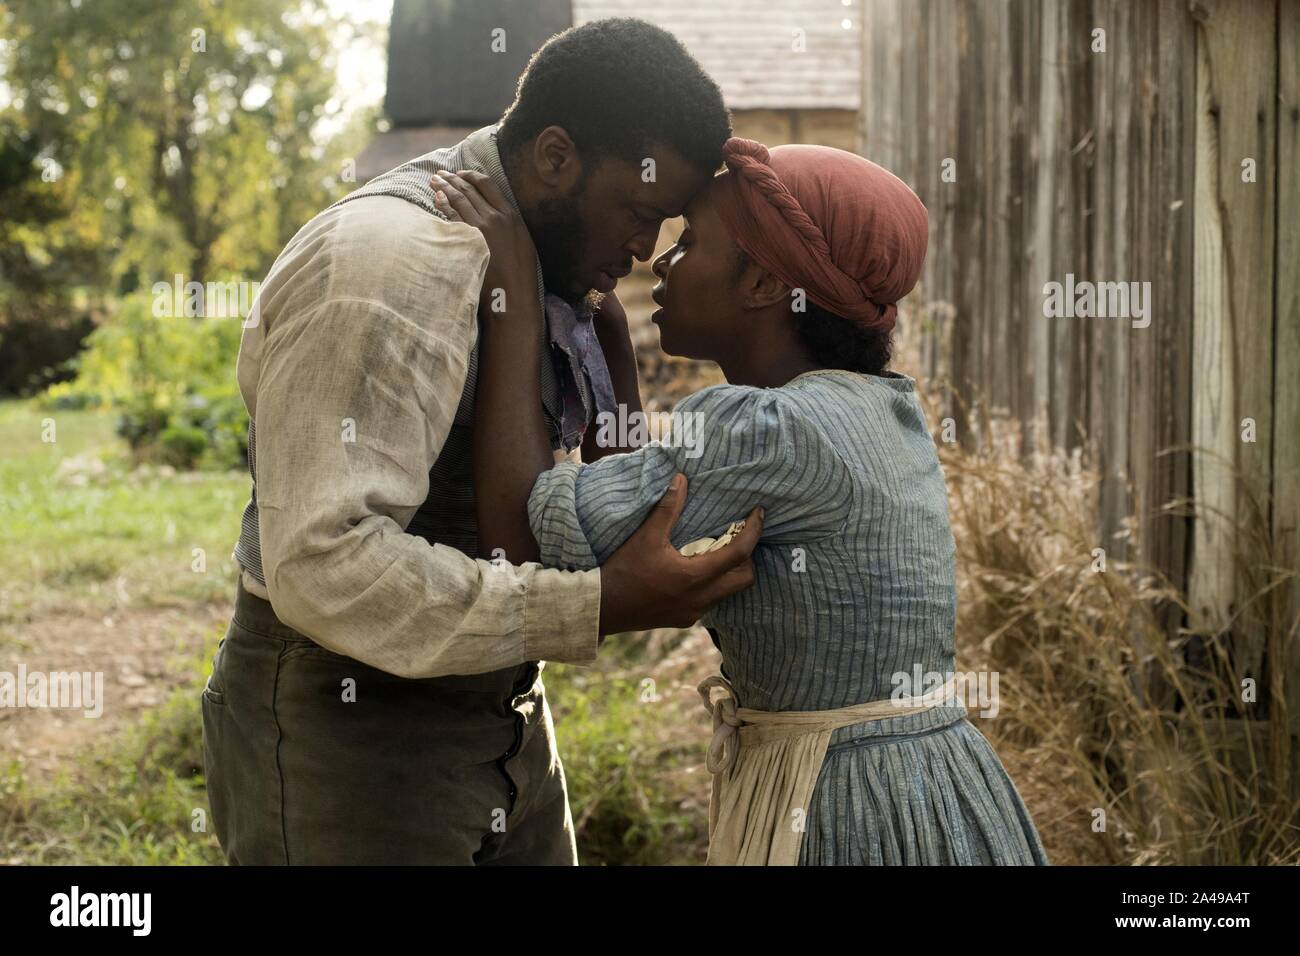 CYNTHIA ERIVO and ZACKARY MOMOH in HARRIET (2019), directed by KASI LEMMONS. Credit: FOCUS FEATURES / Album Stock Photo